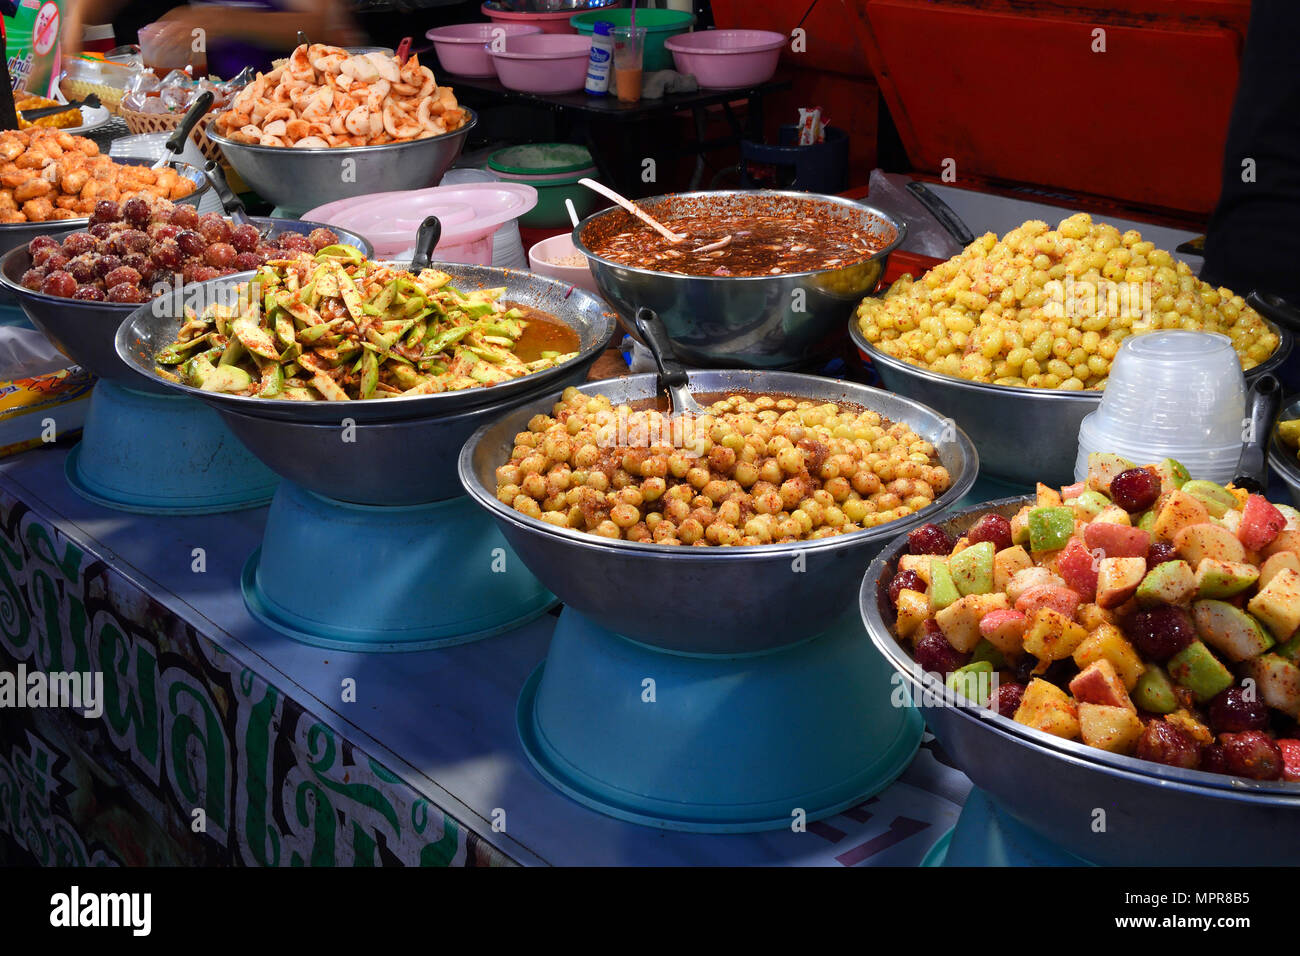 Food stand with typical dishes, Chillva Market, Phuket, Thailand Stock Photo